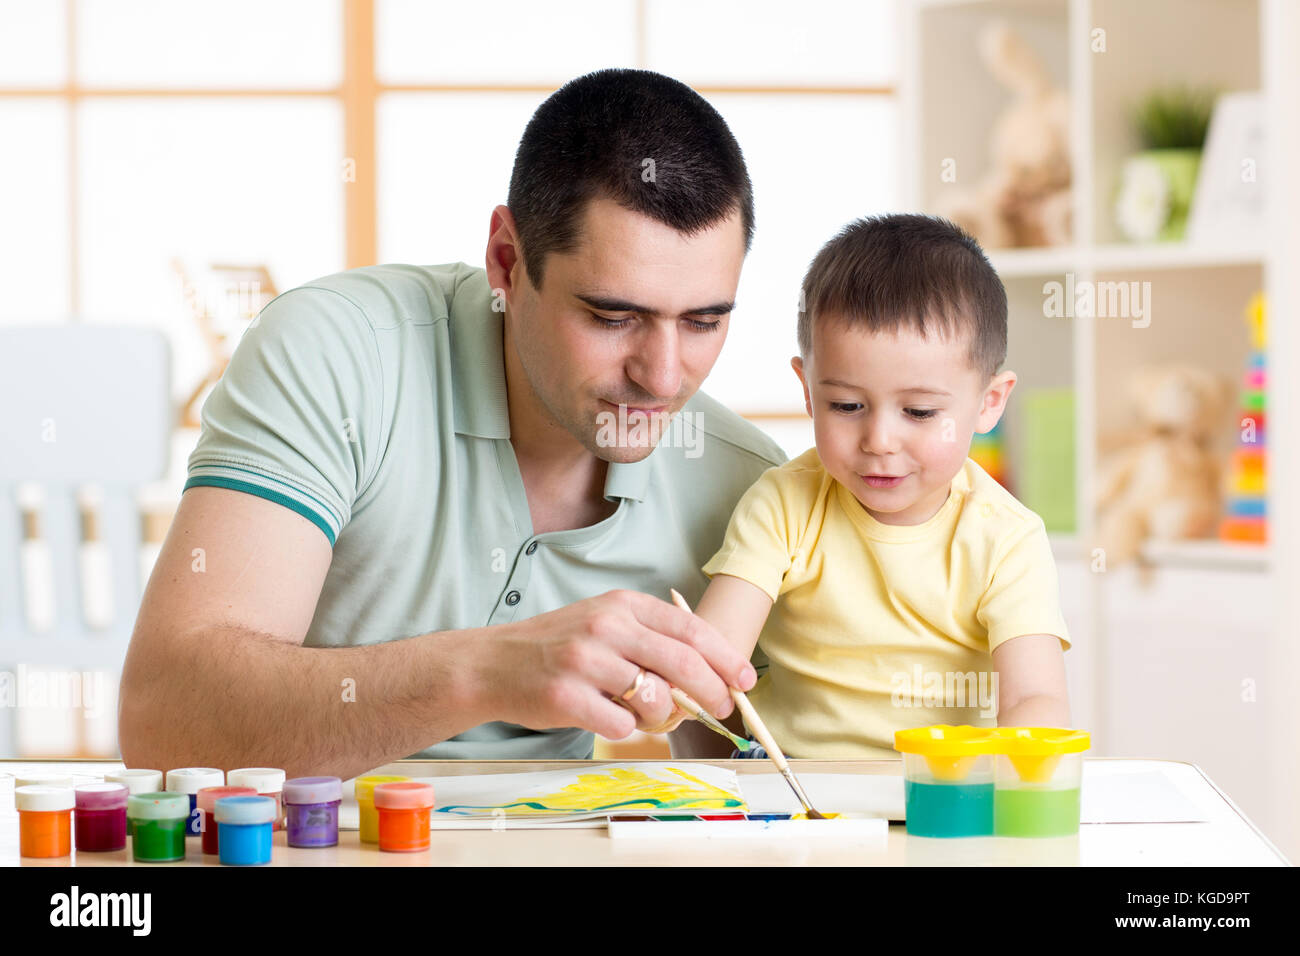 Father and little boy having fun painting at home Stock Photo